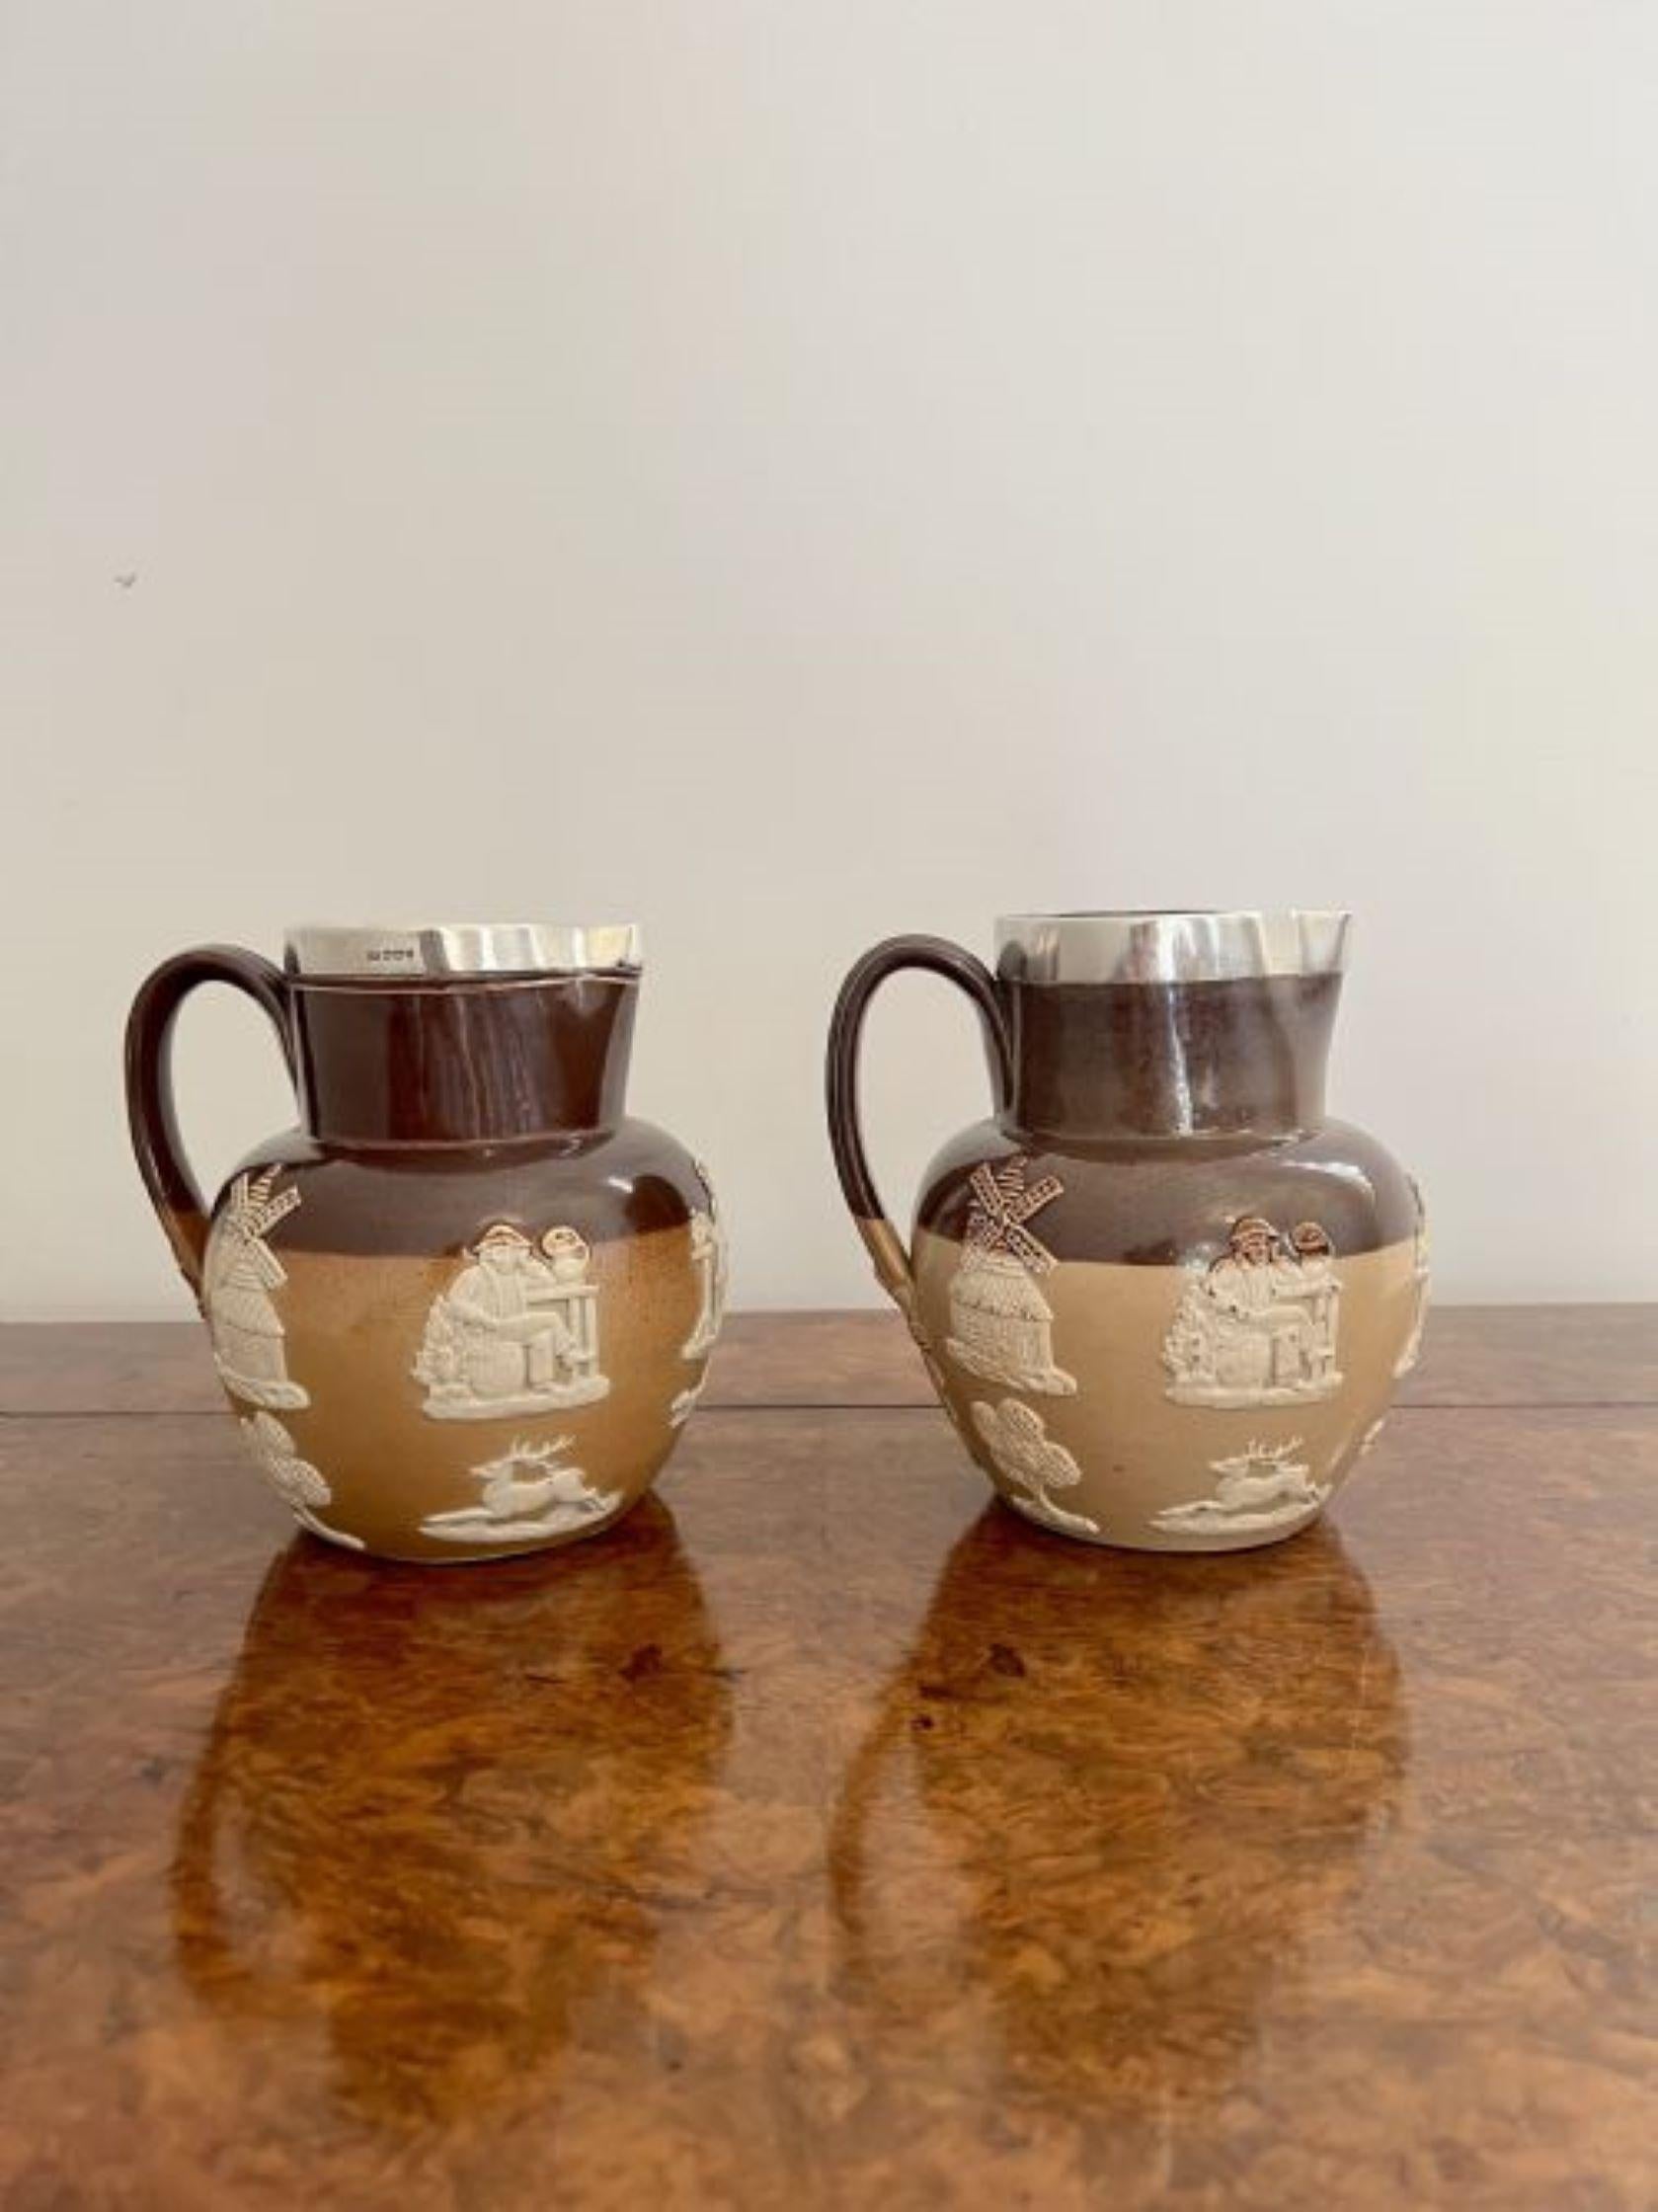 Unusual pair of quality antique Doulton Lambeth harvest jugs having a quality pair of Doulton Lambeth harvest jugs having a two tone brown background decorated throughout with hunting scenes, figures and objects, a shaped handle to the back with